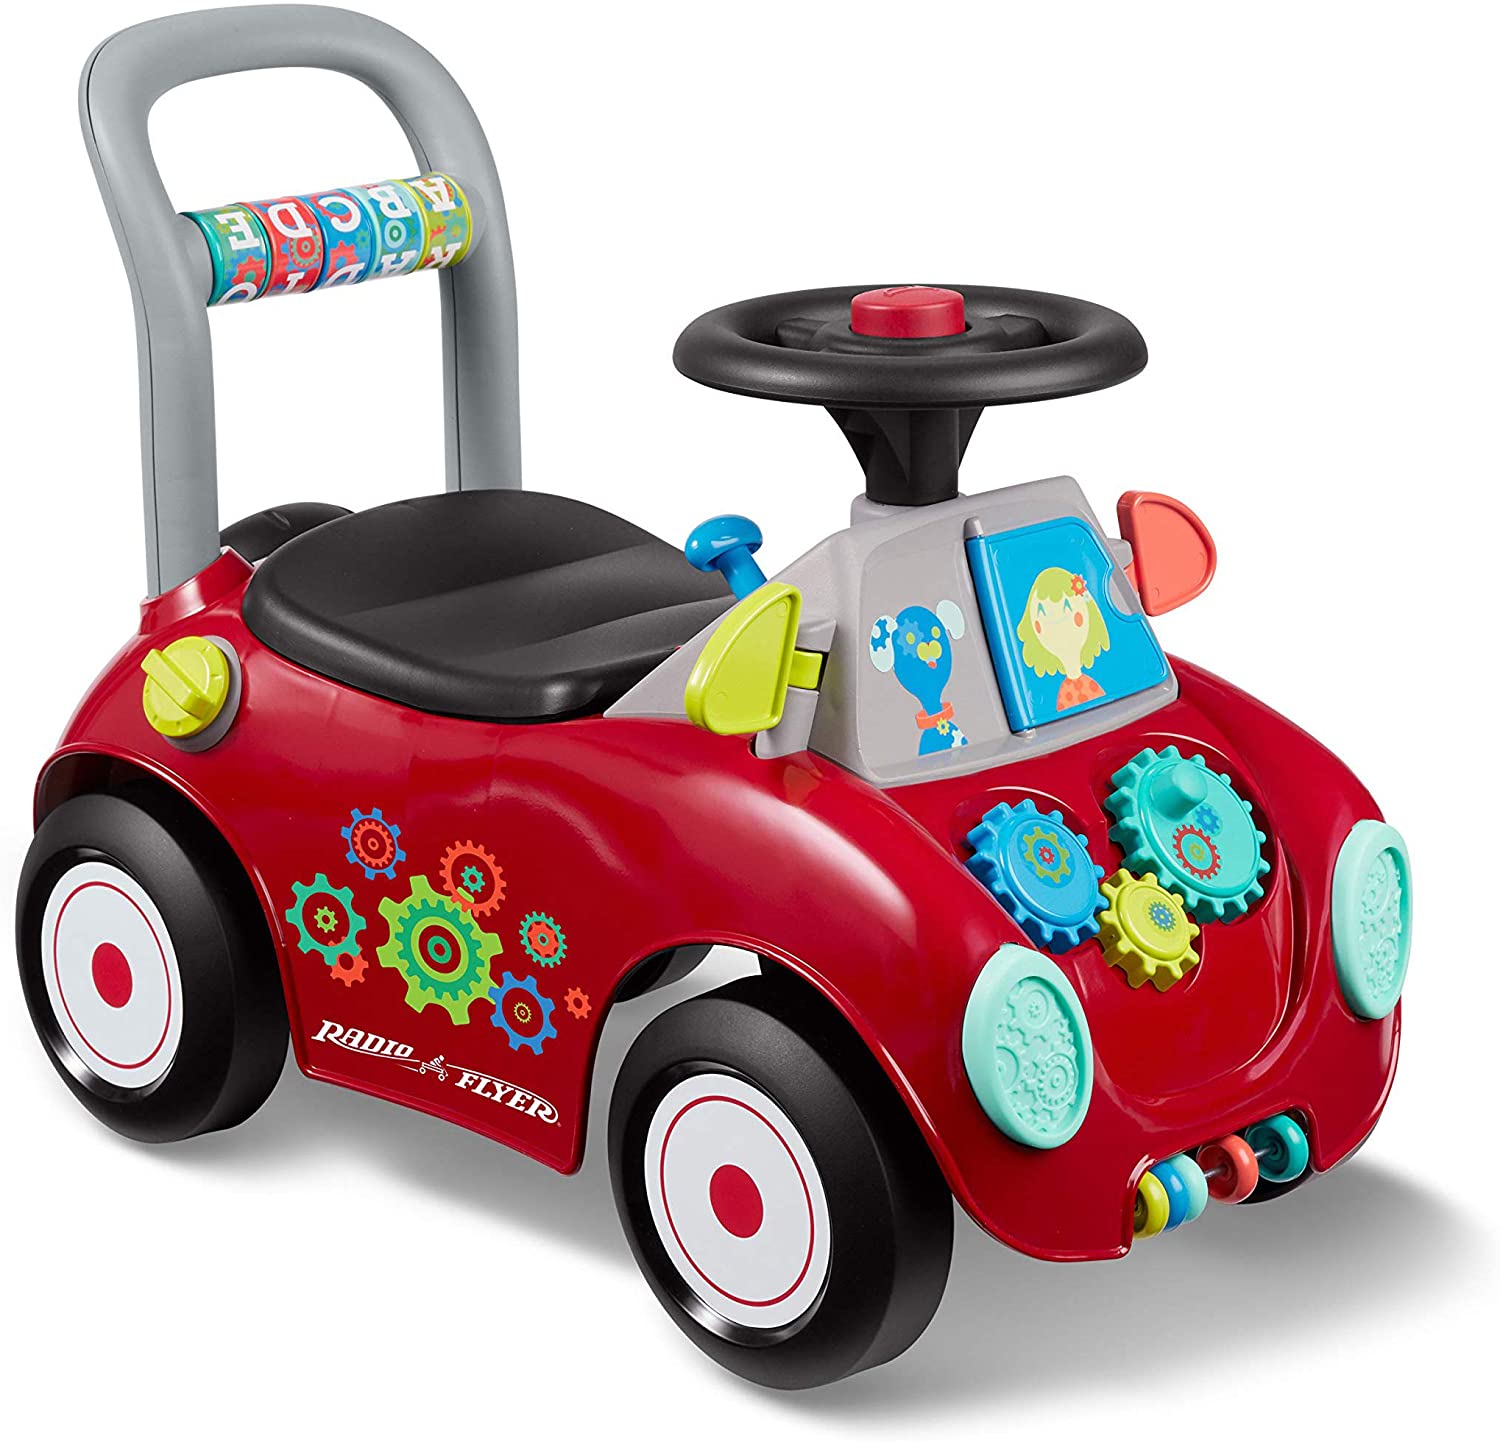 Radio Flyer Motor Skill Vehicle Toy For 1-Year-Old Boy